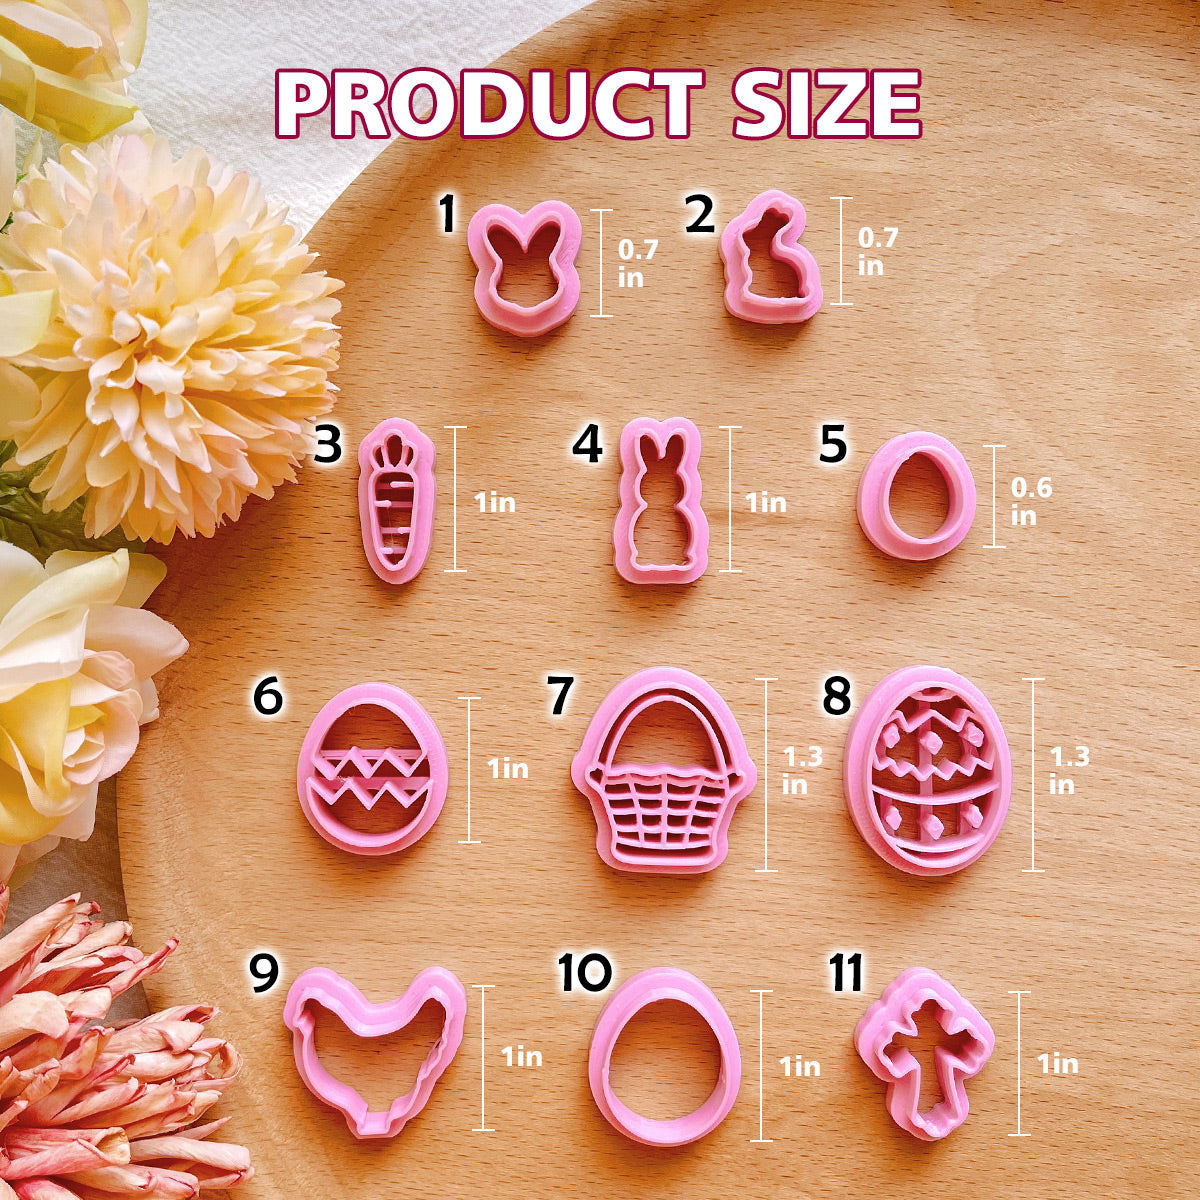 KEOKER Easter Day Polymer Clay Cutters(11 Shapes)